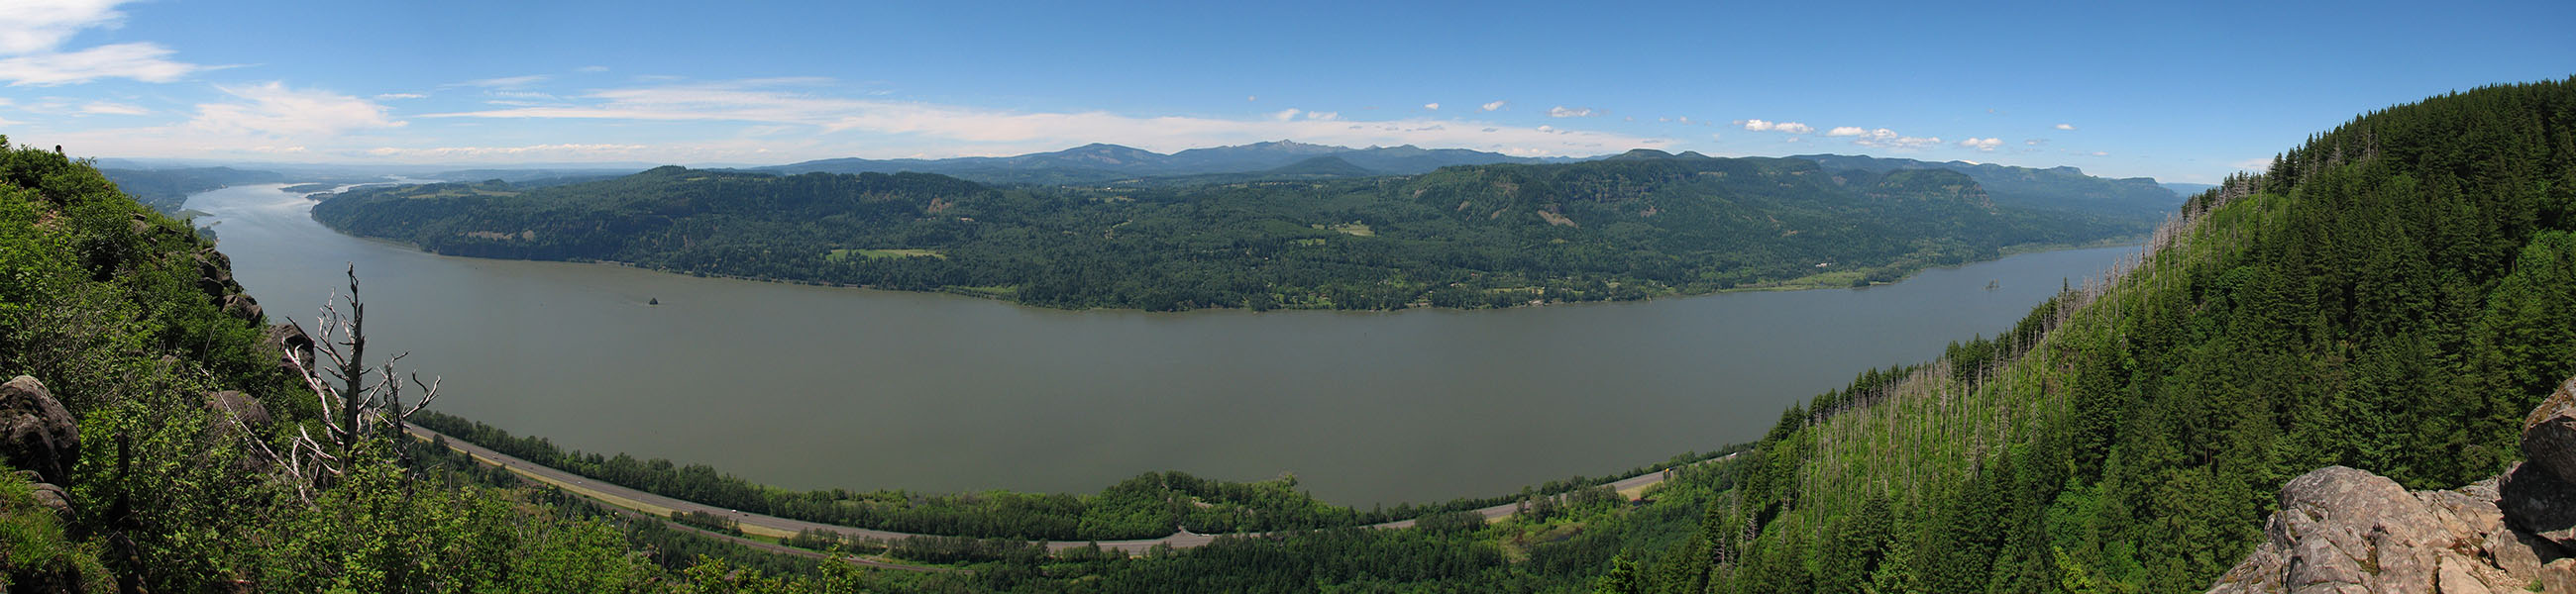 Angel's Rest panorama [Angel's Rest, Columbia River Gorge, Multnomah County, Oregon]